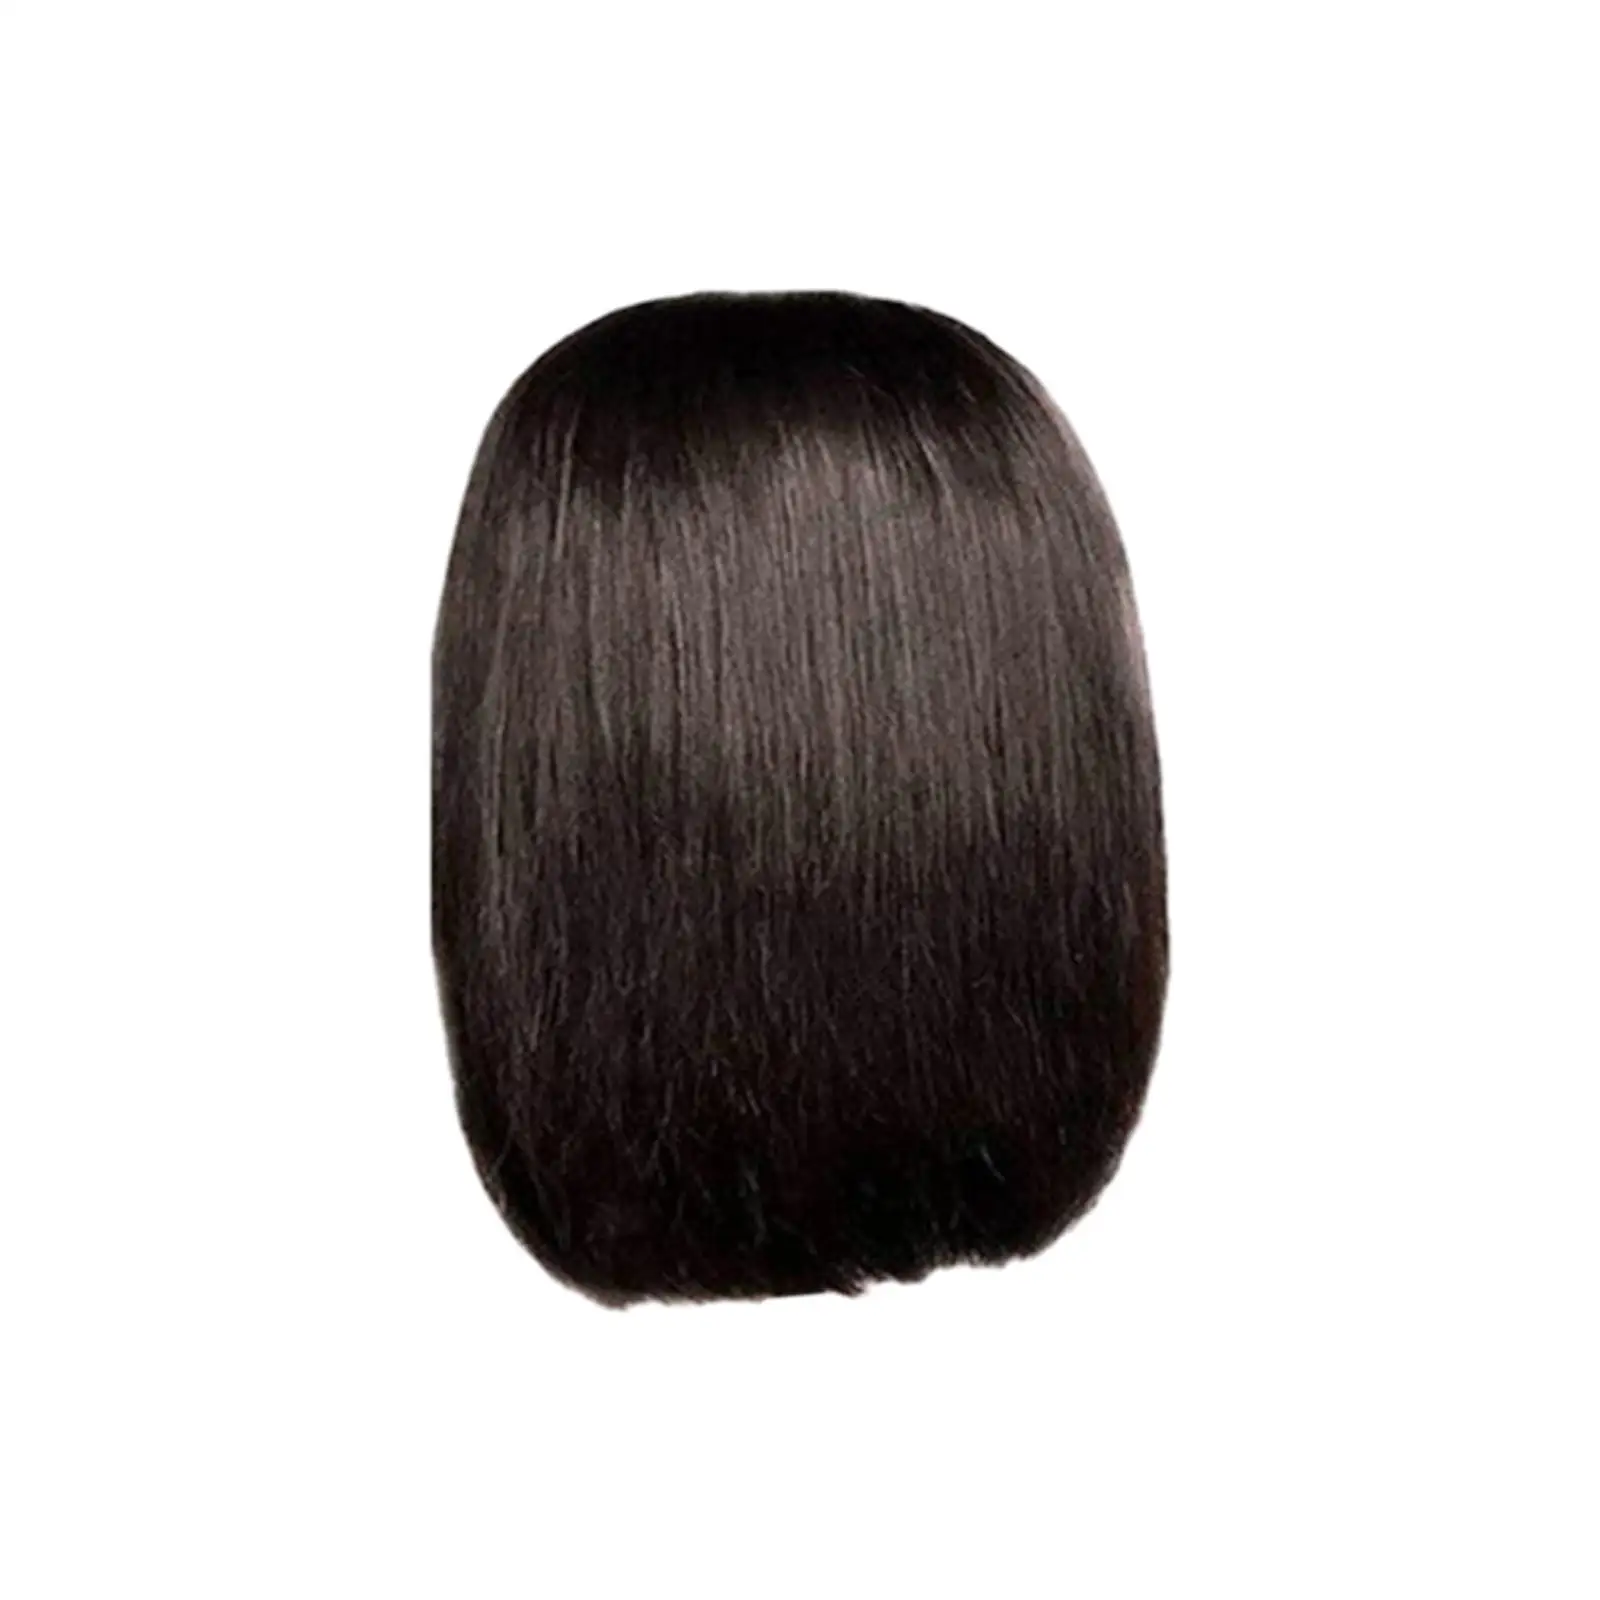 Straight Short Bob Wig Short Bob Wig Easy to Use Breathable Wear and Go Natural Bob Wig Short Hair Wig for Party